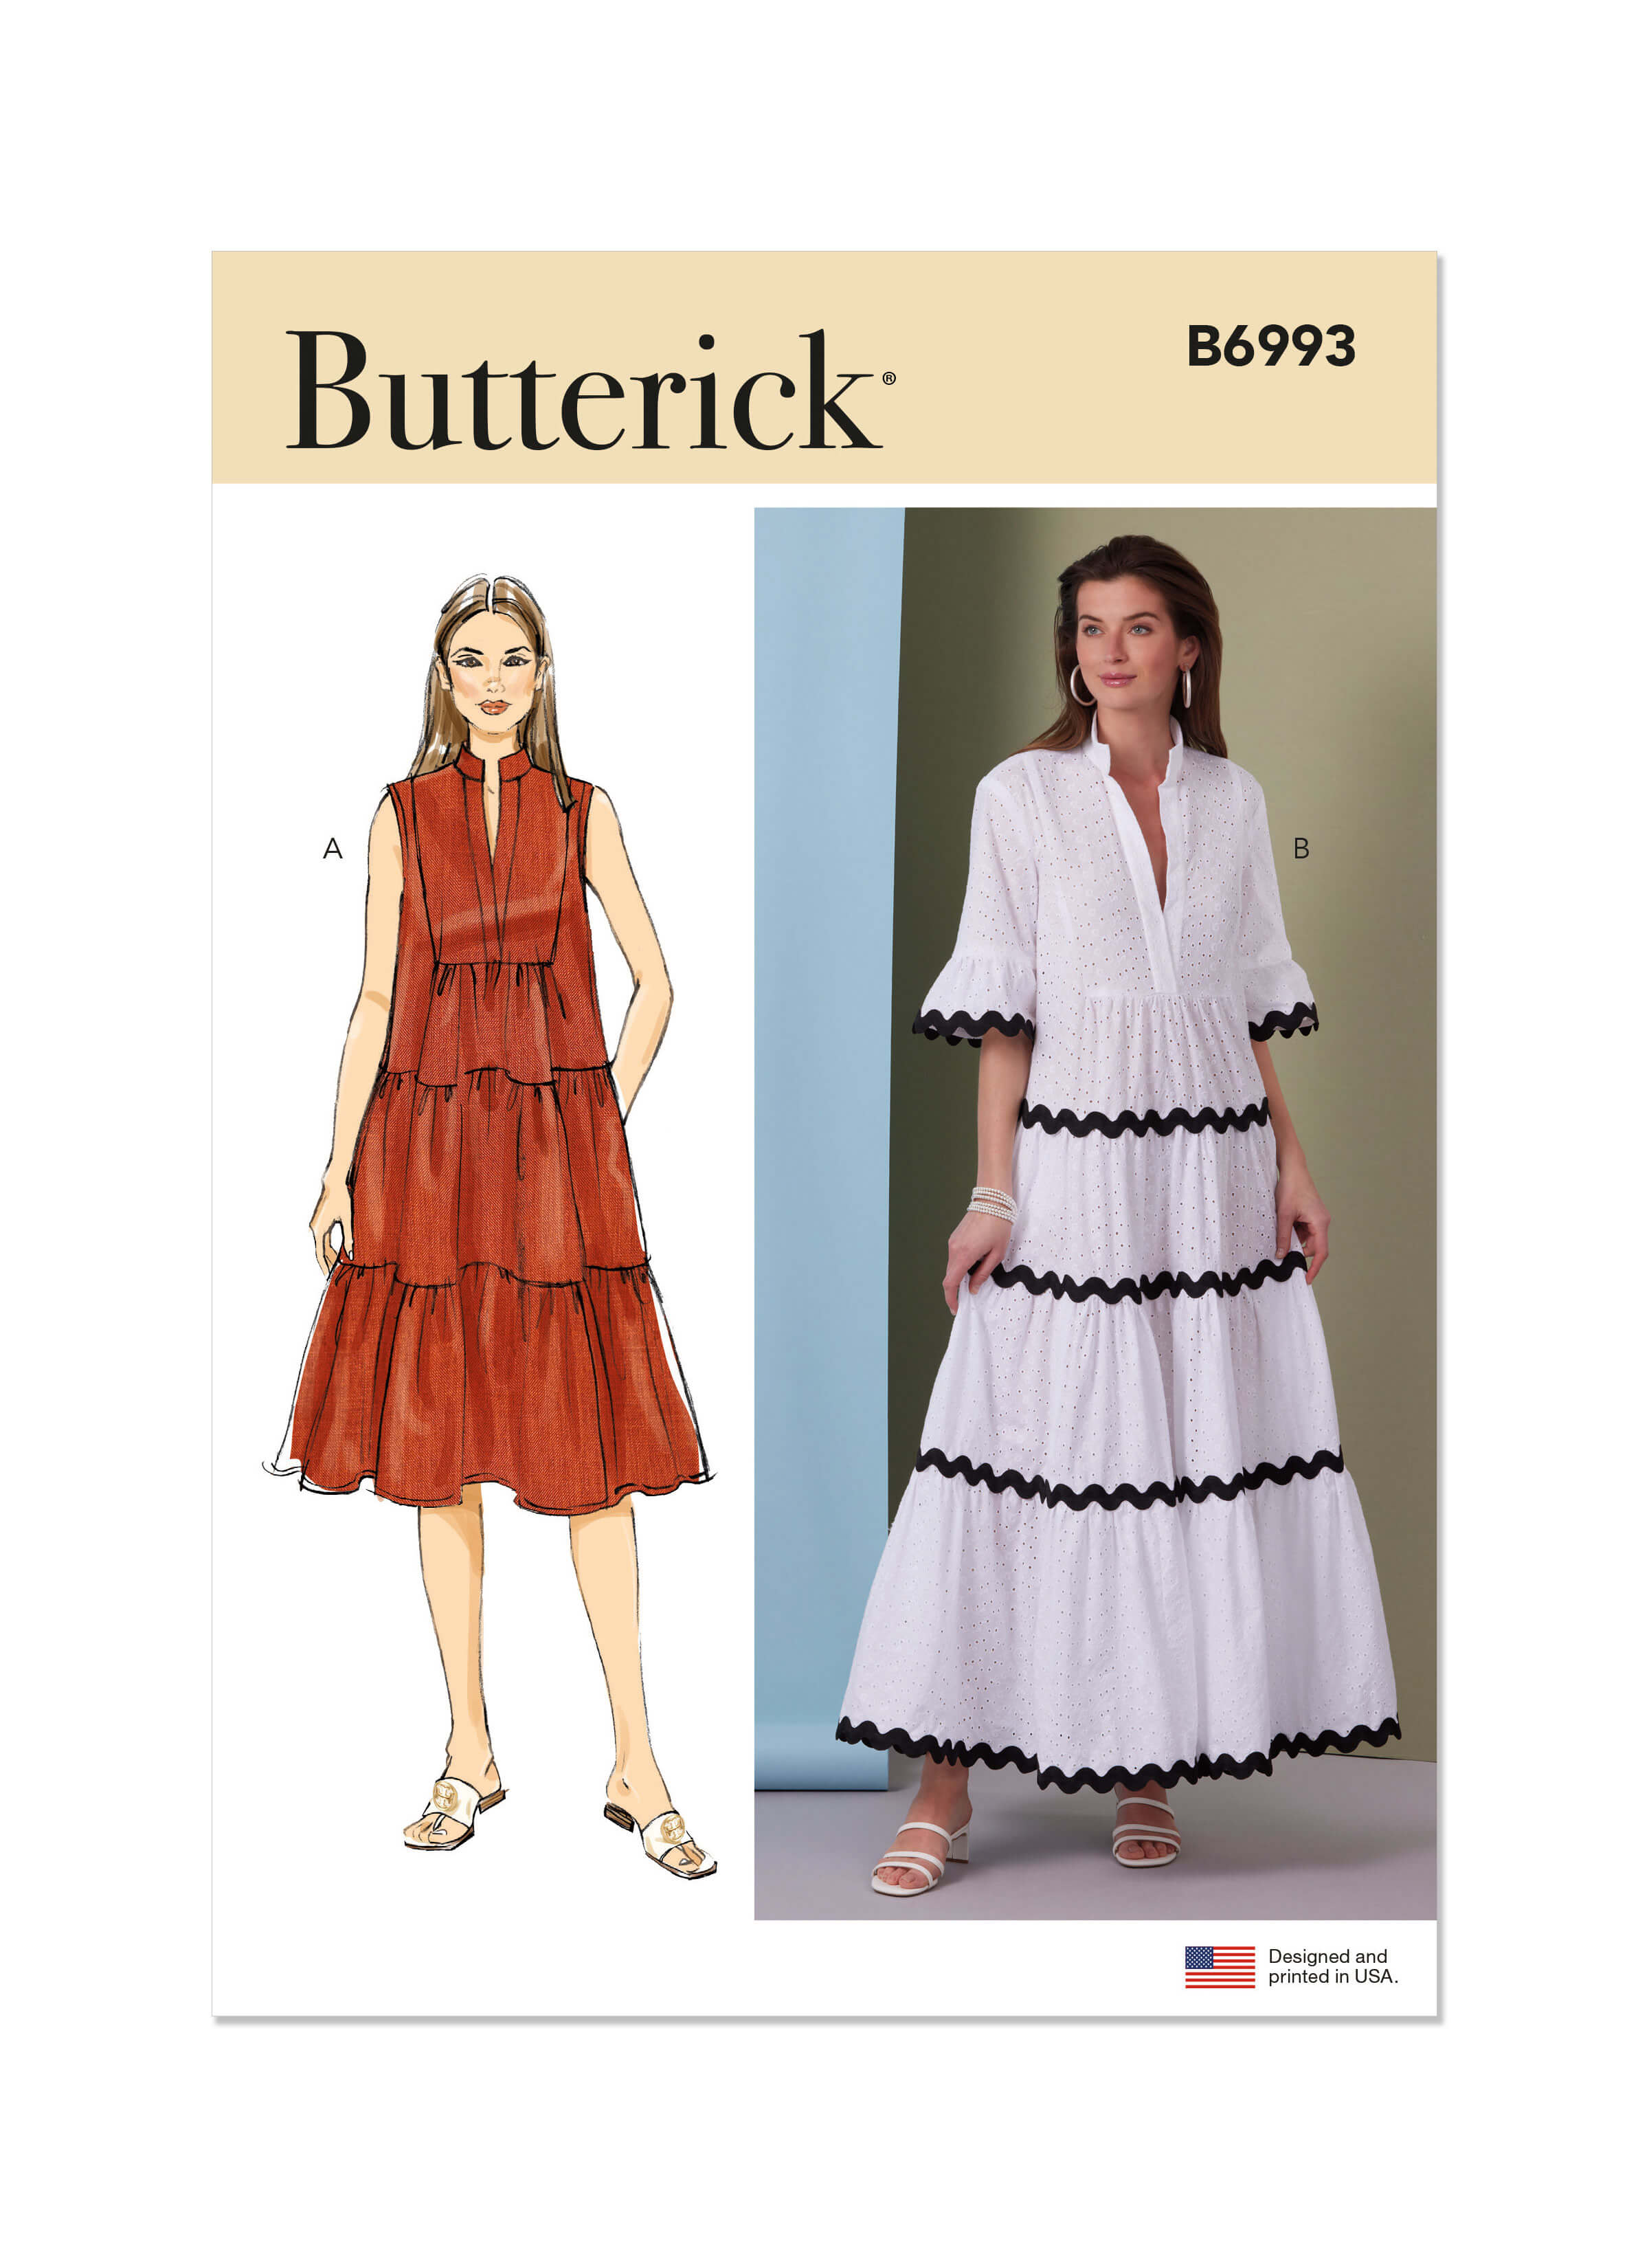 Butterick Sewing Pattern B6993 Misses' Dresses